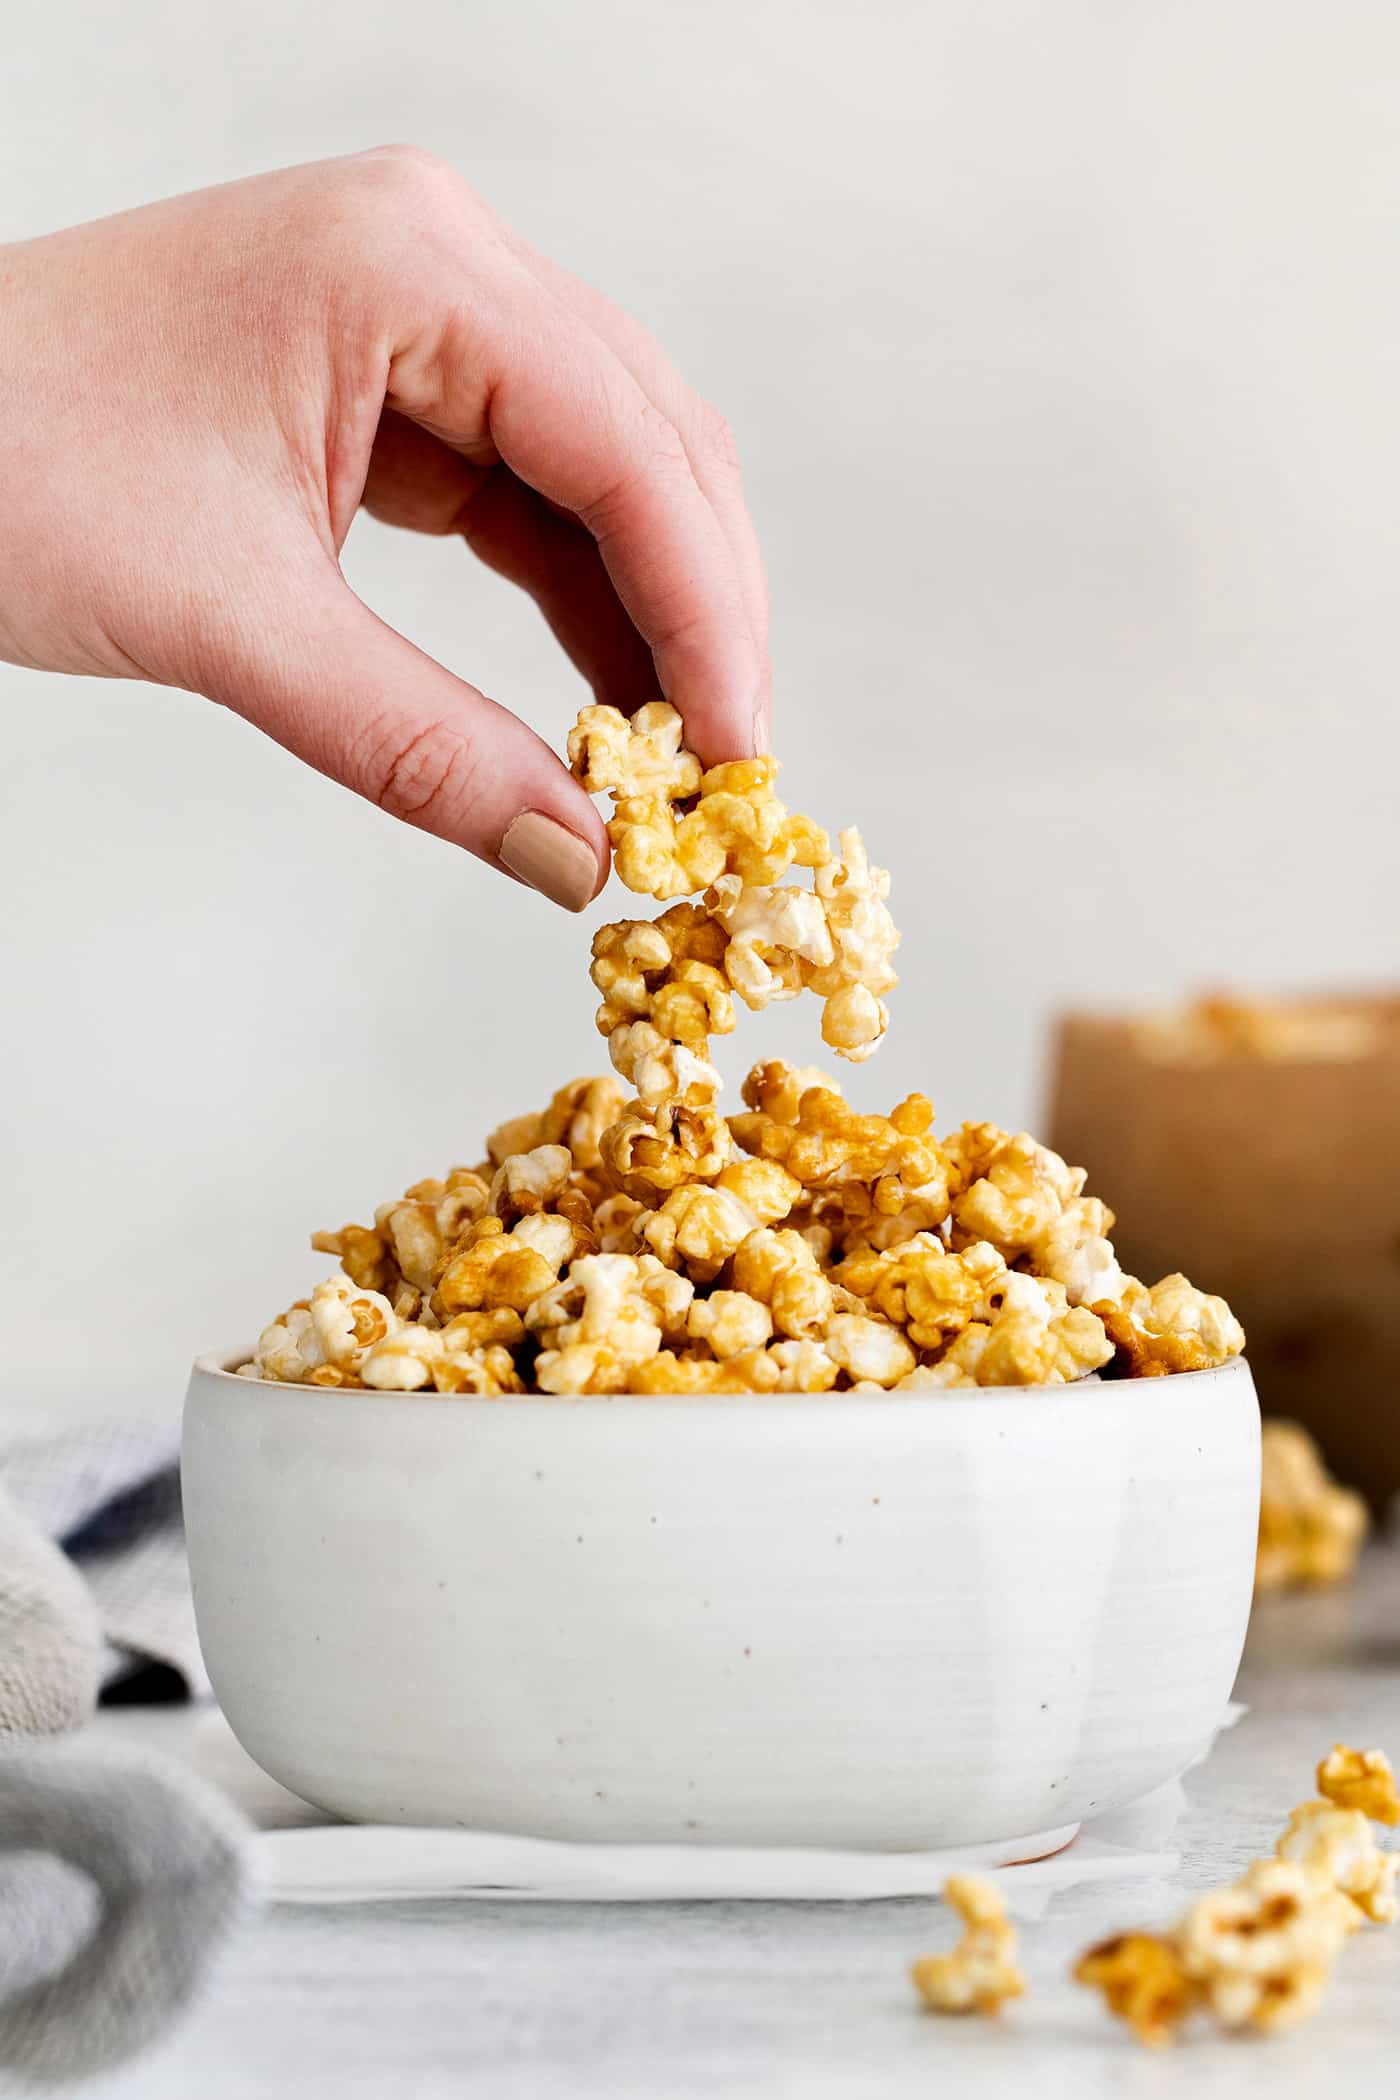 A hand grabbing a piece of caramel popcorn from a white bowl